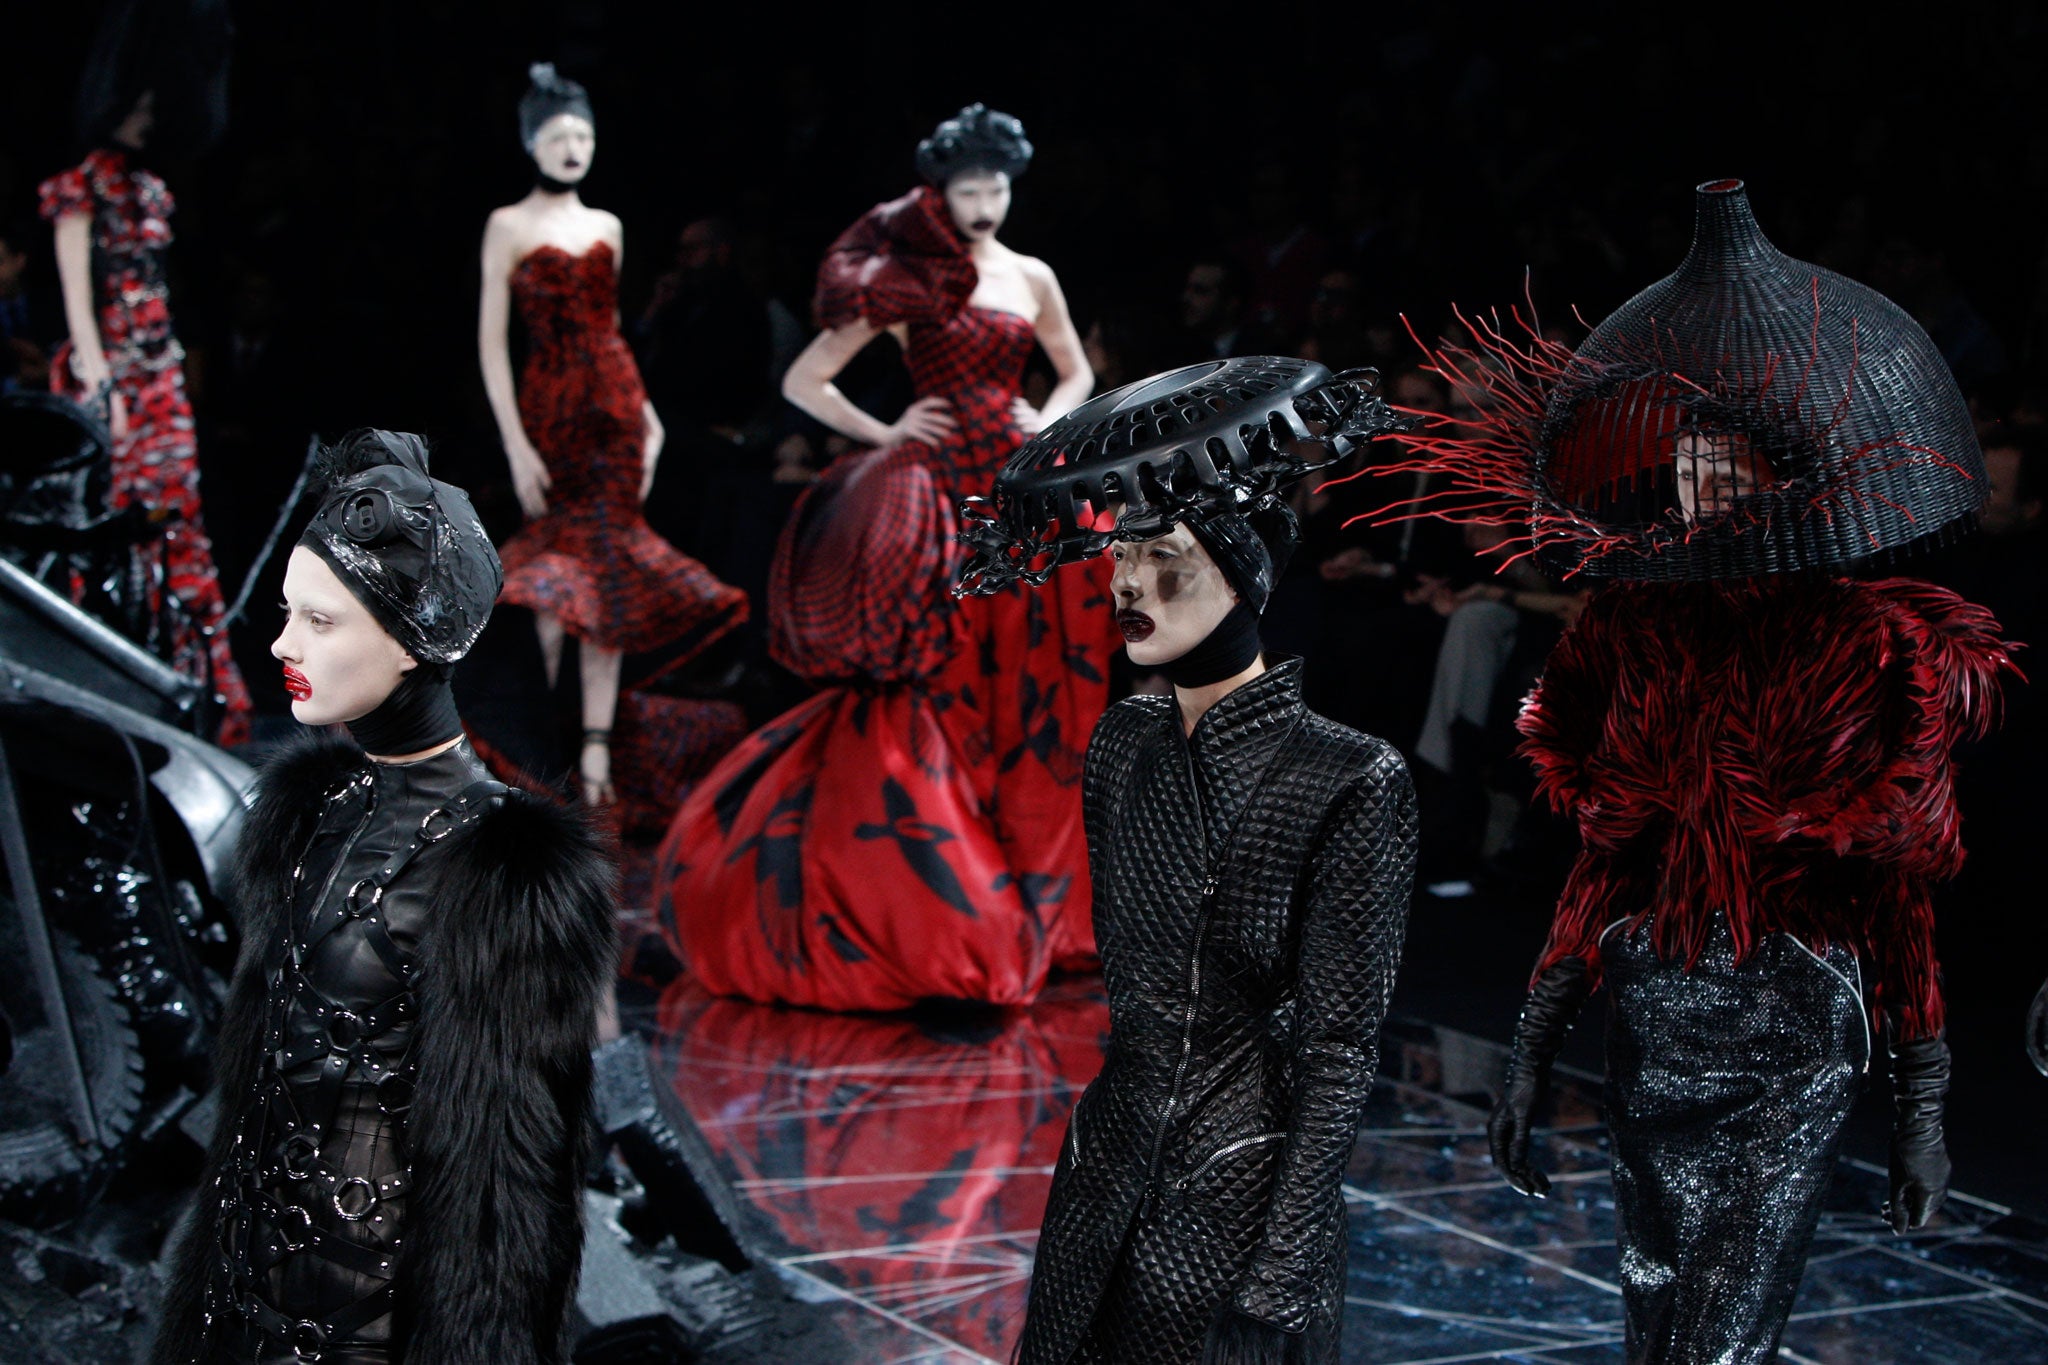 Alexander McQueen: The catwalk was a stage for the designer's